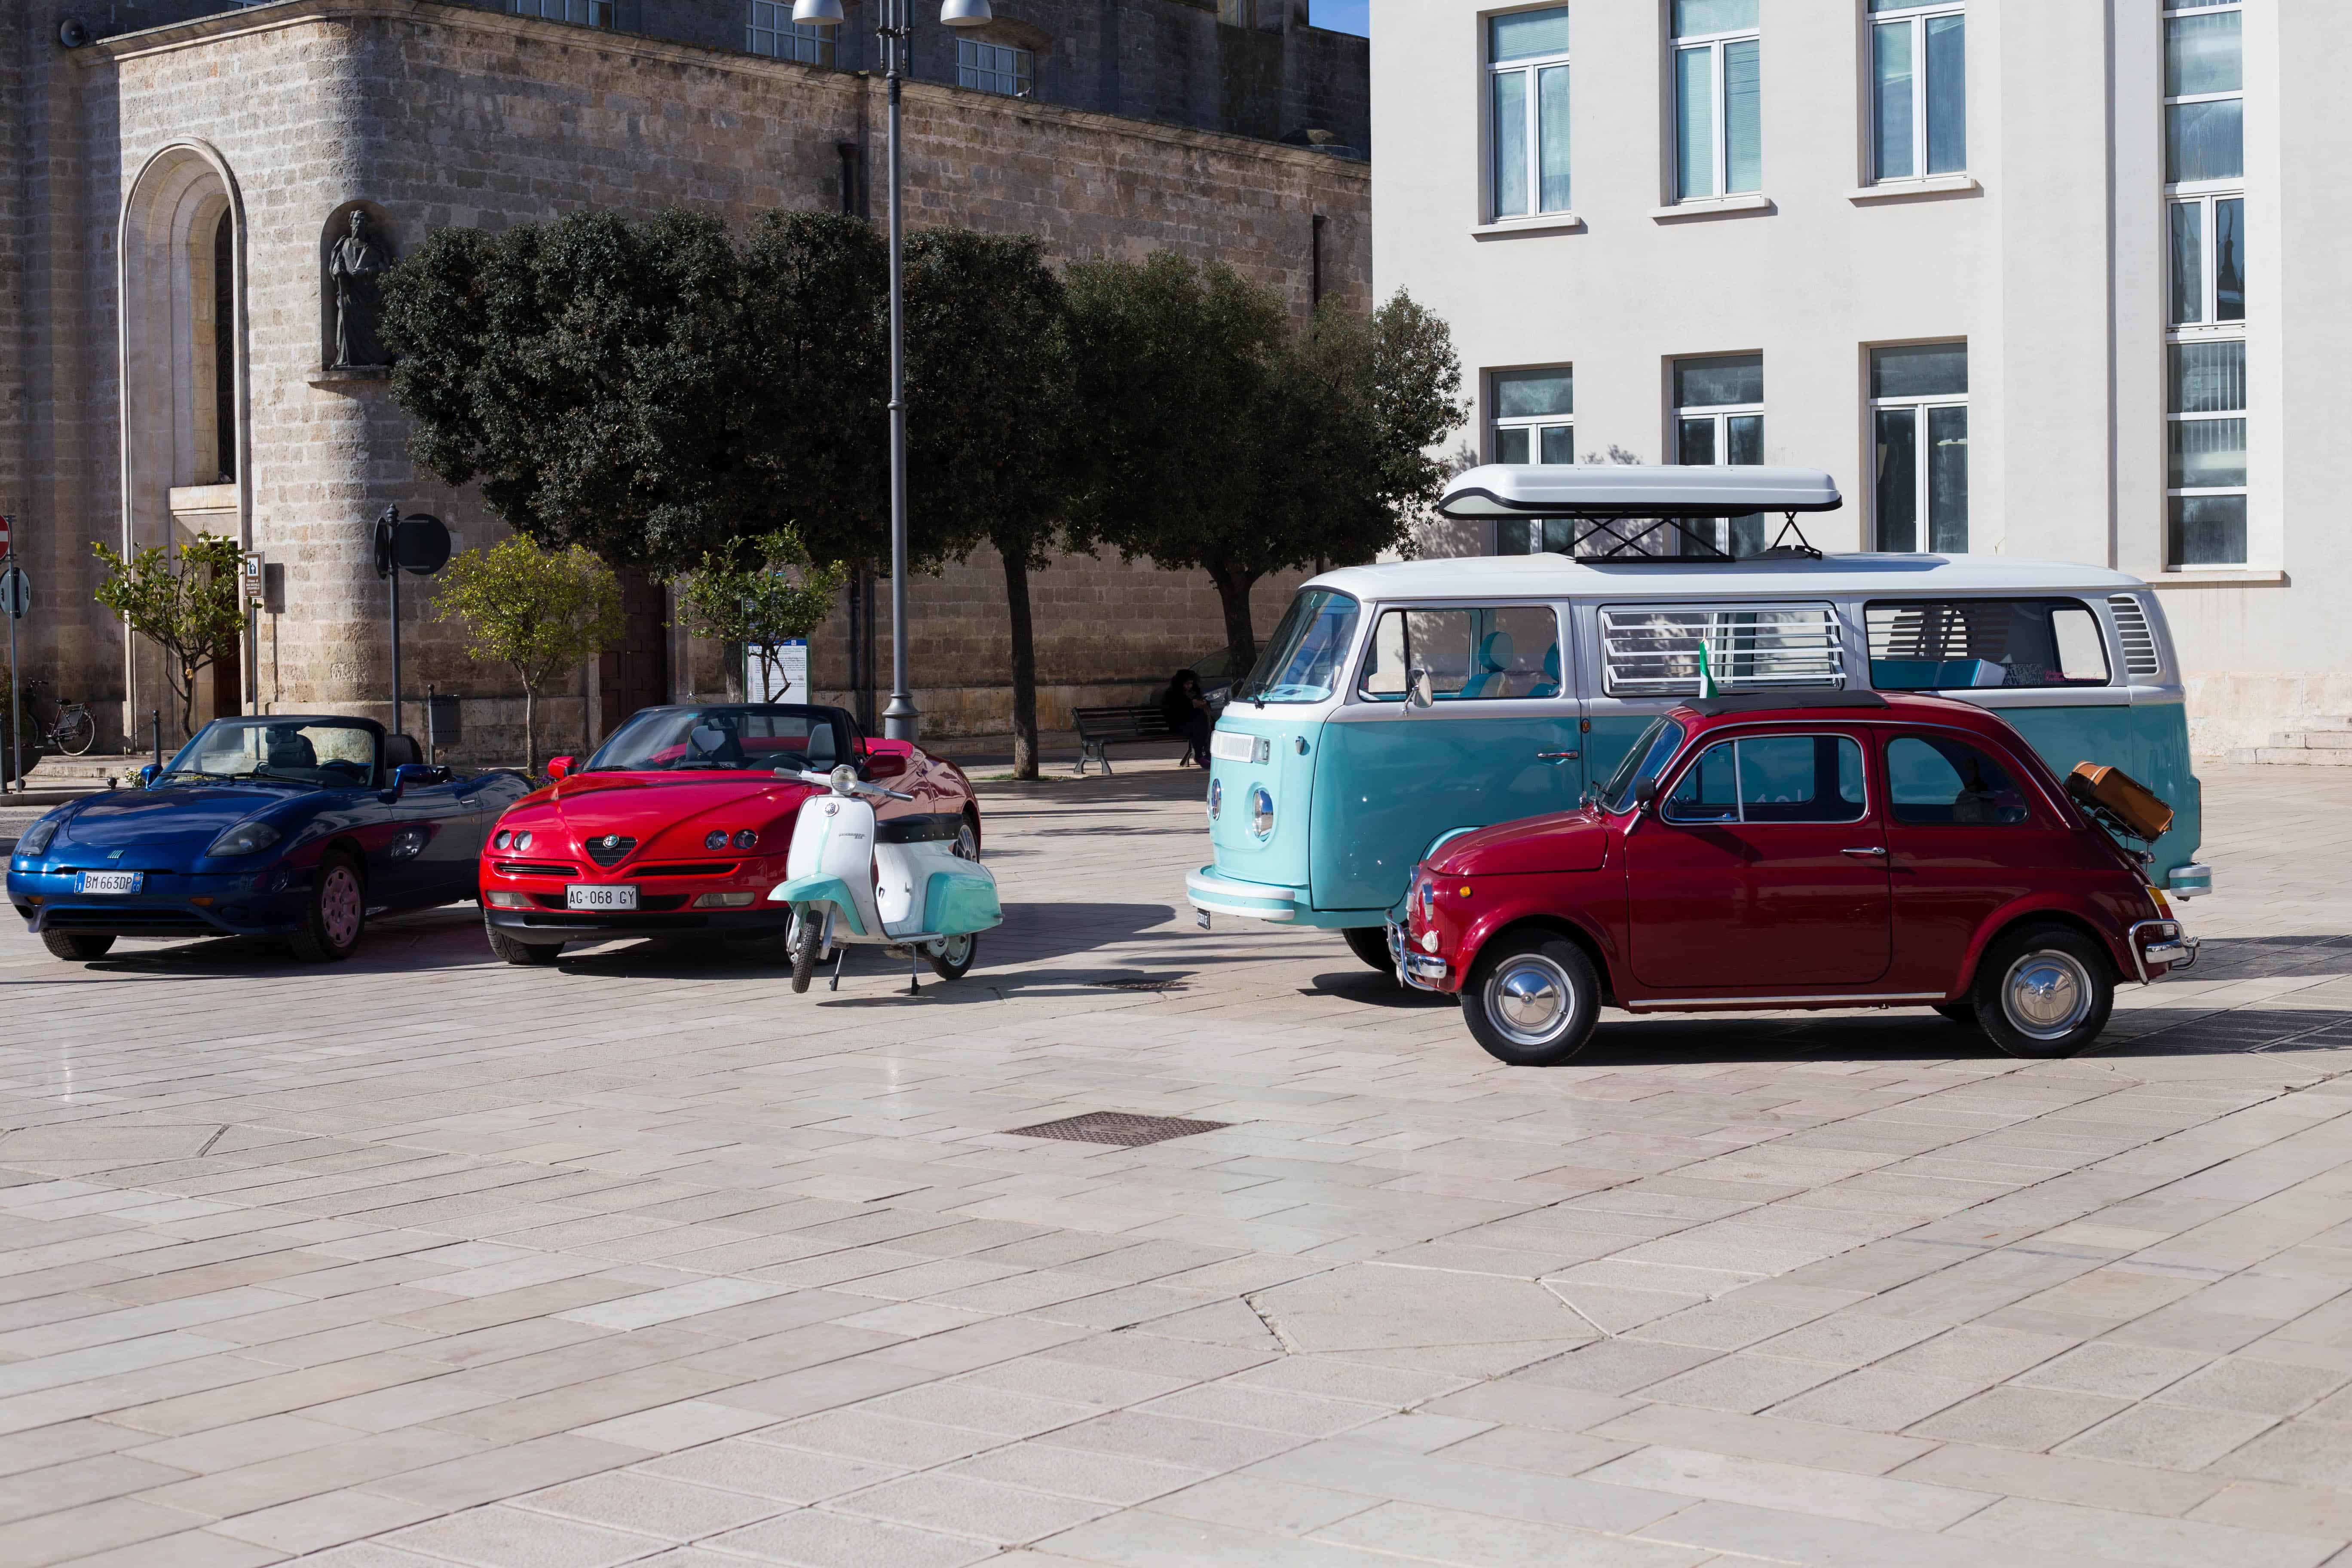 Cars in square in center of Italy